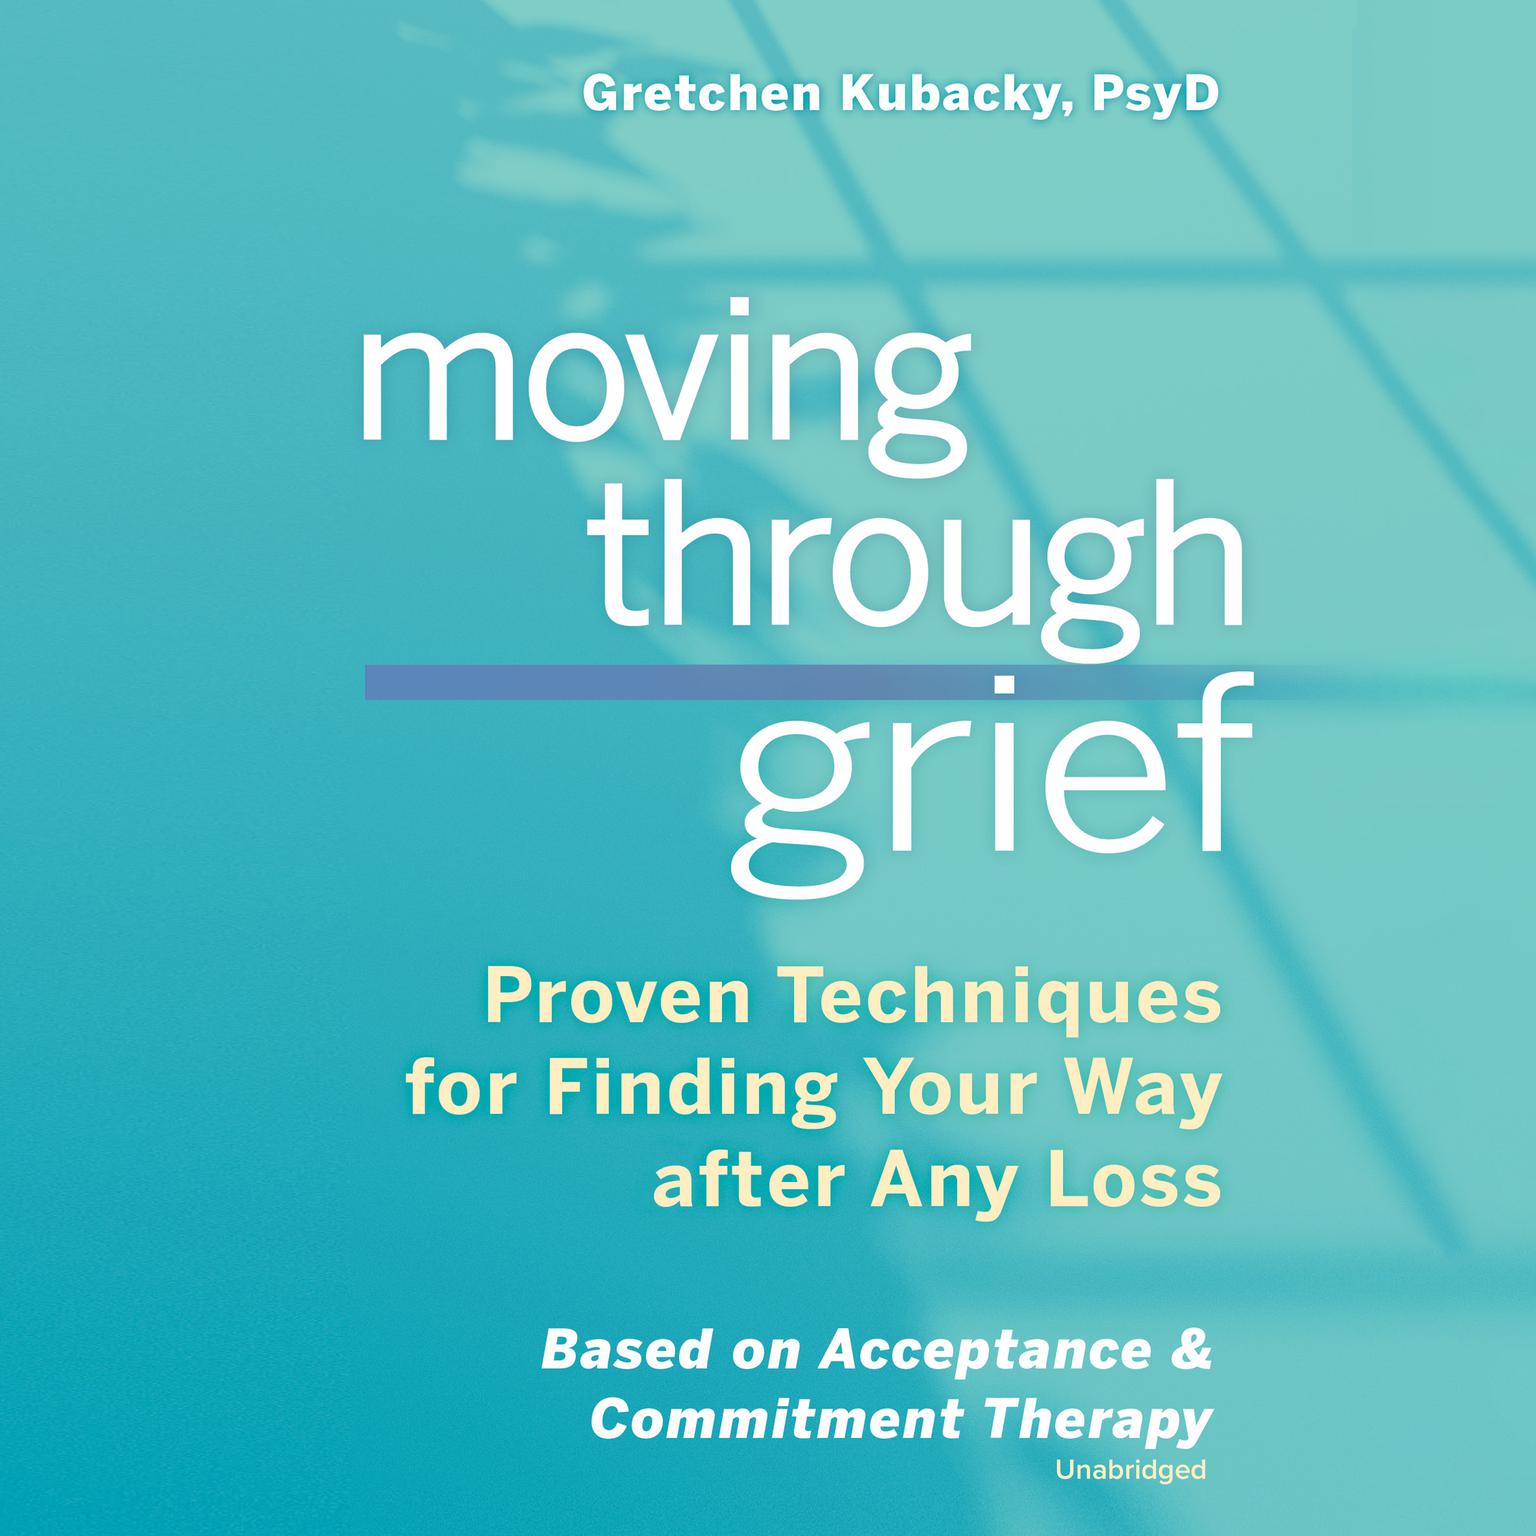 Moving through Grief: Proven Techniques for Finding Your Way after Any Loss Audiobook, by Gretchen Kubacky